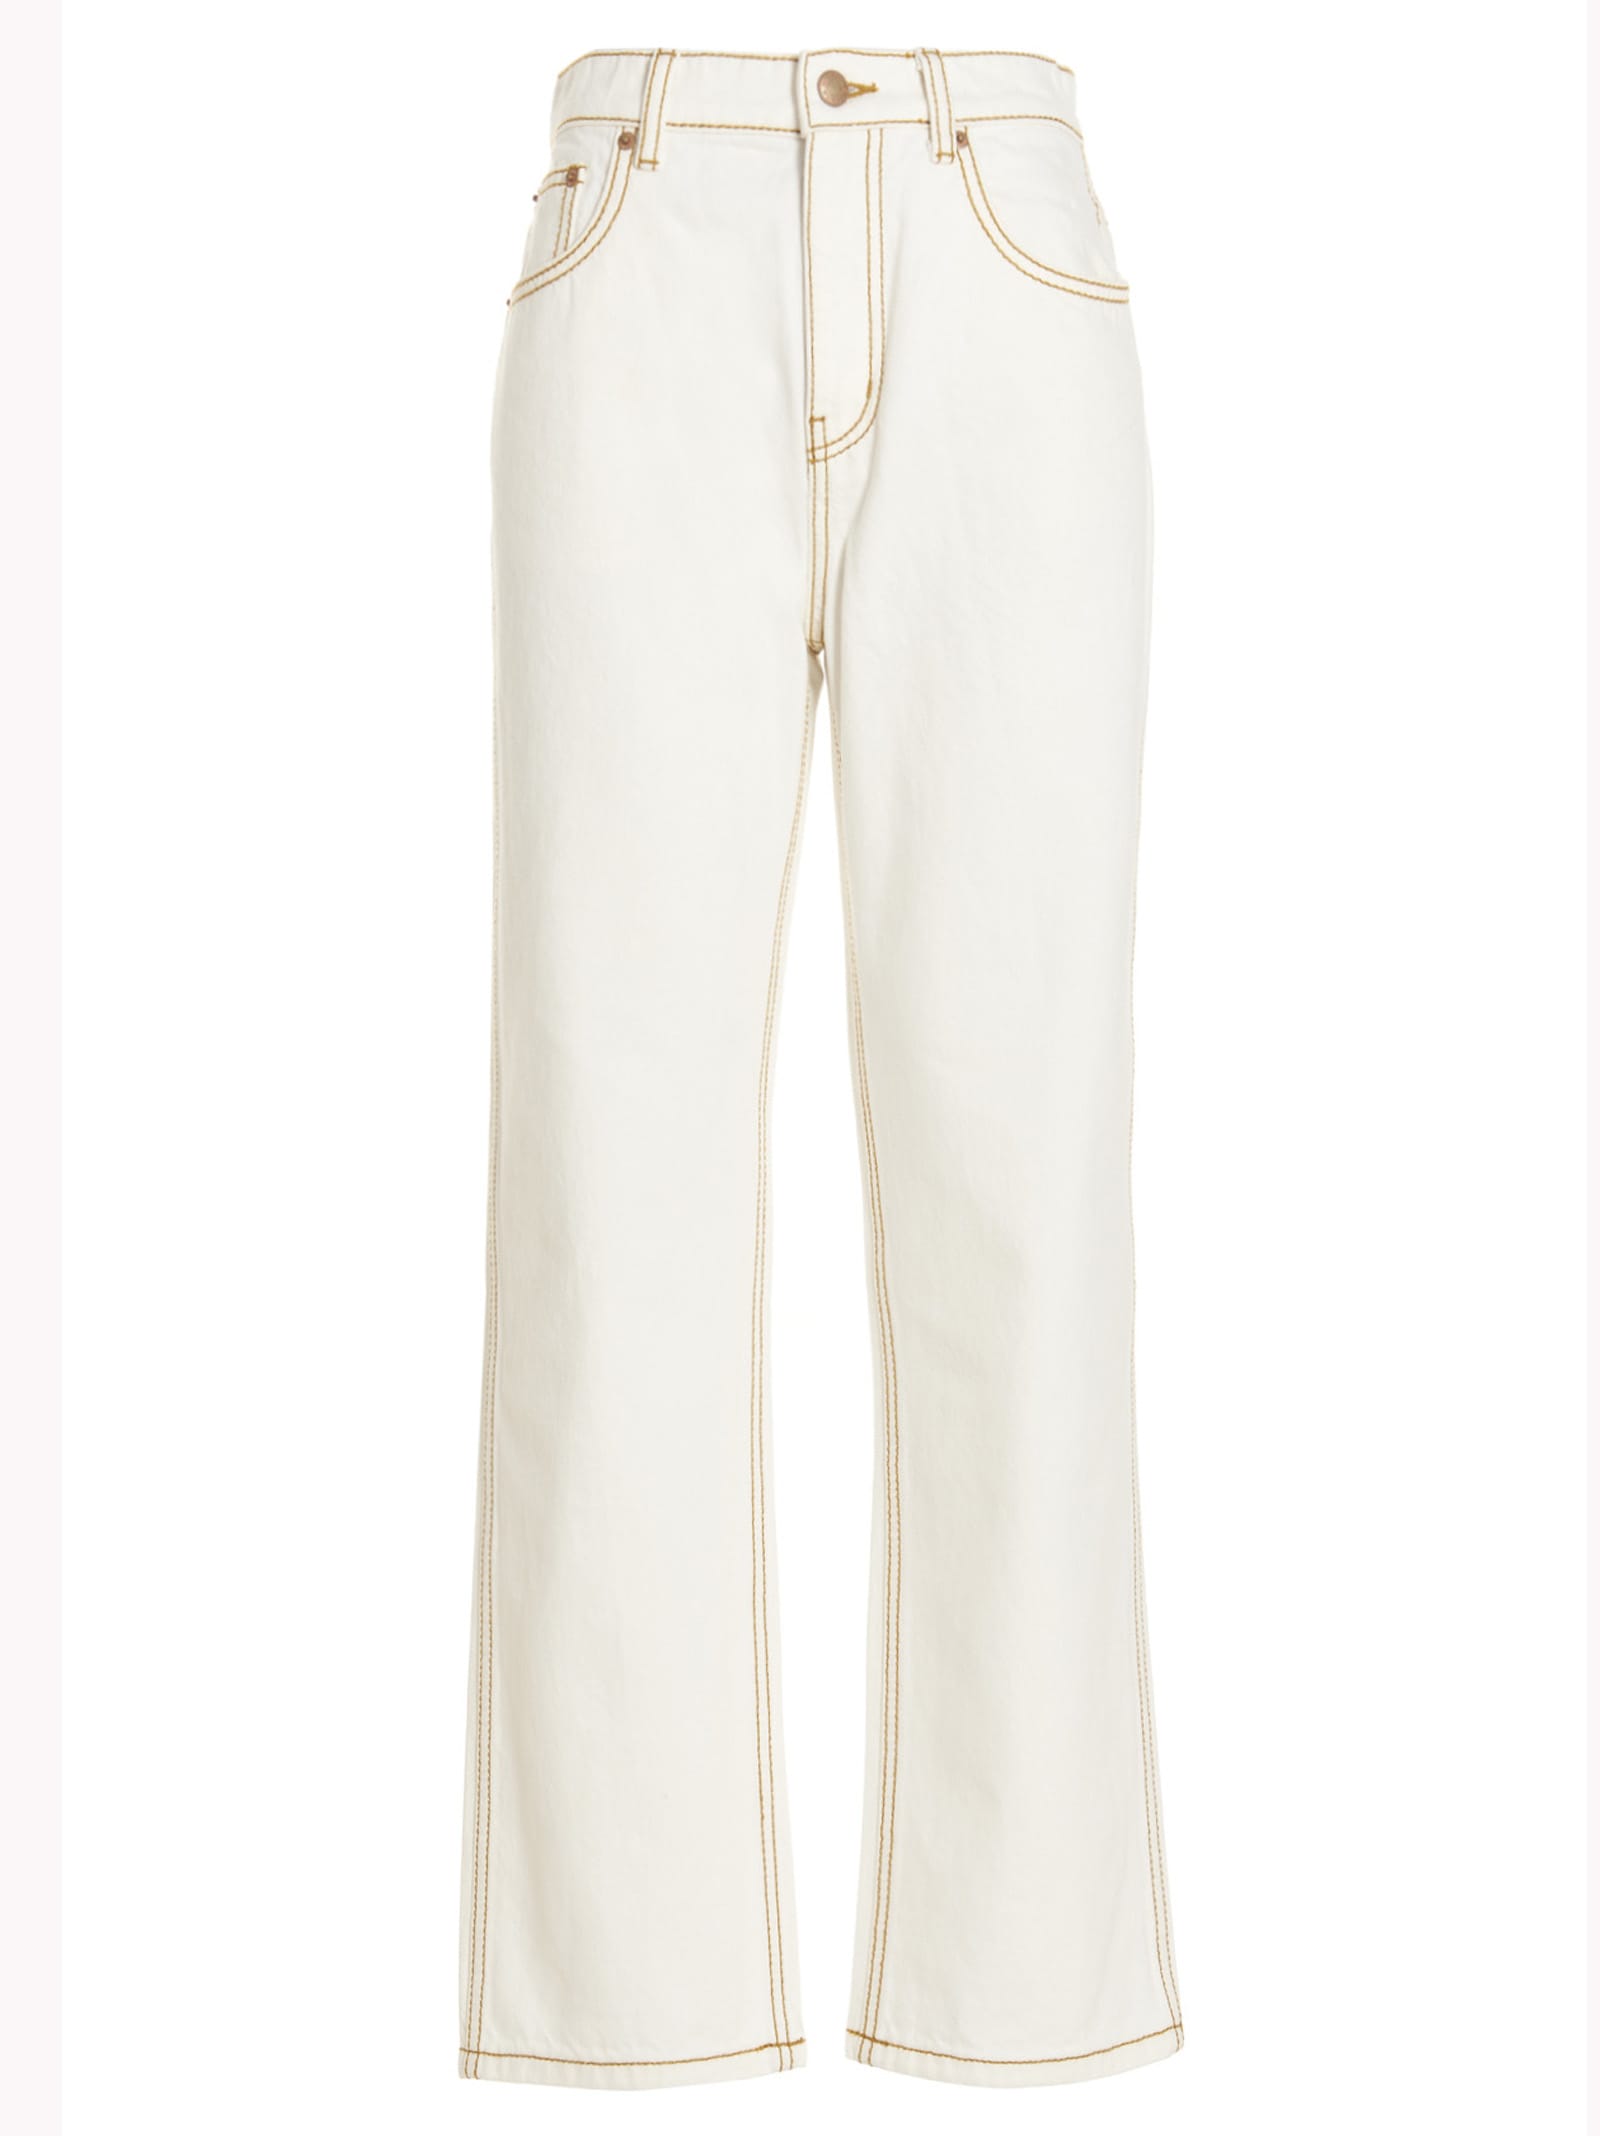 Tory Burch Logo Embroidery Jeans